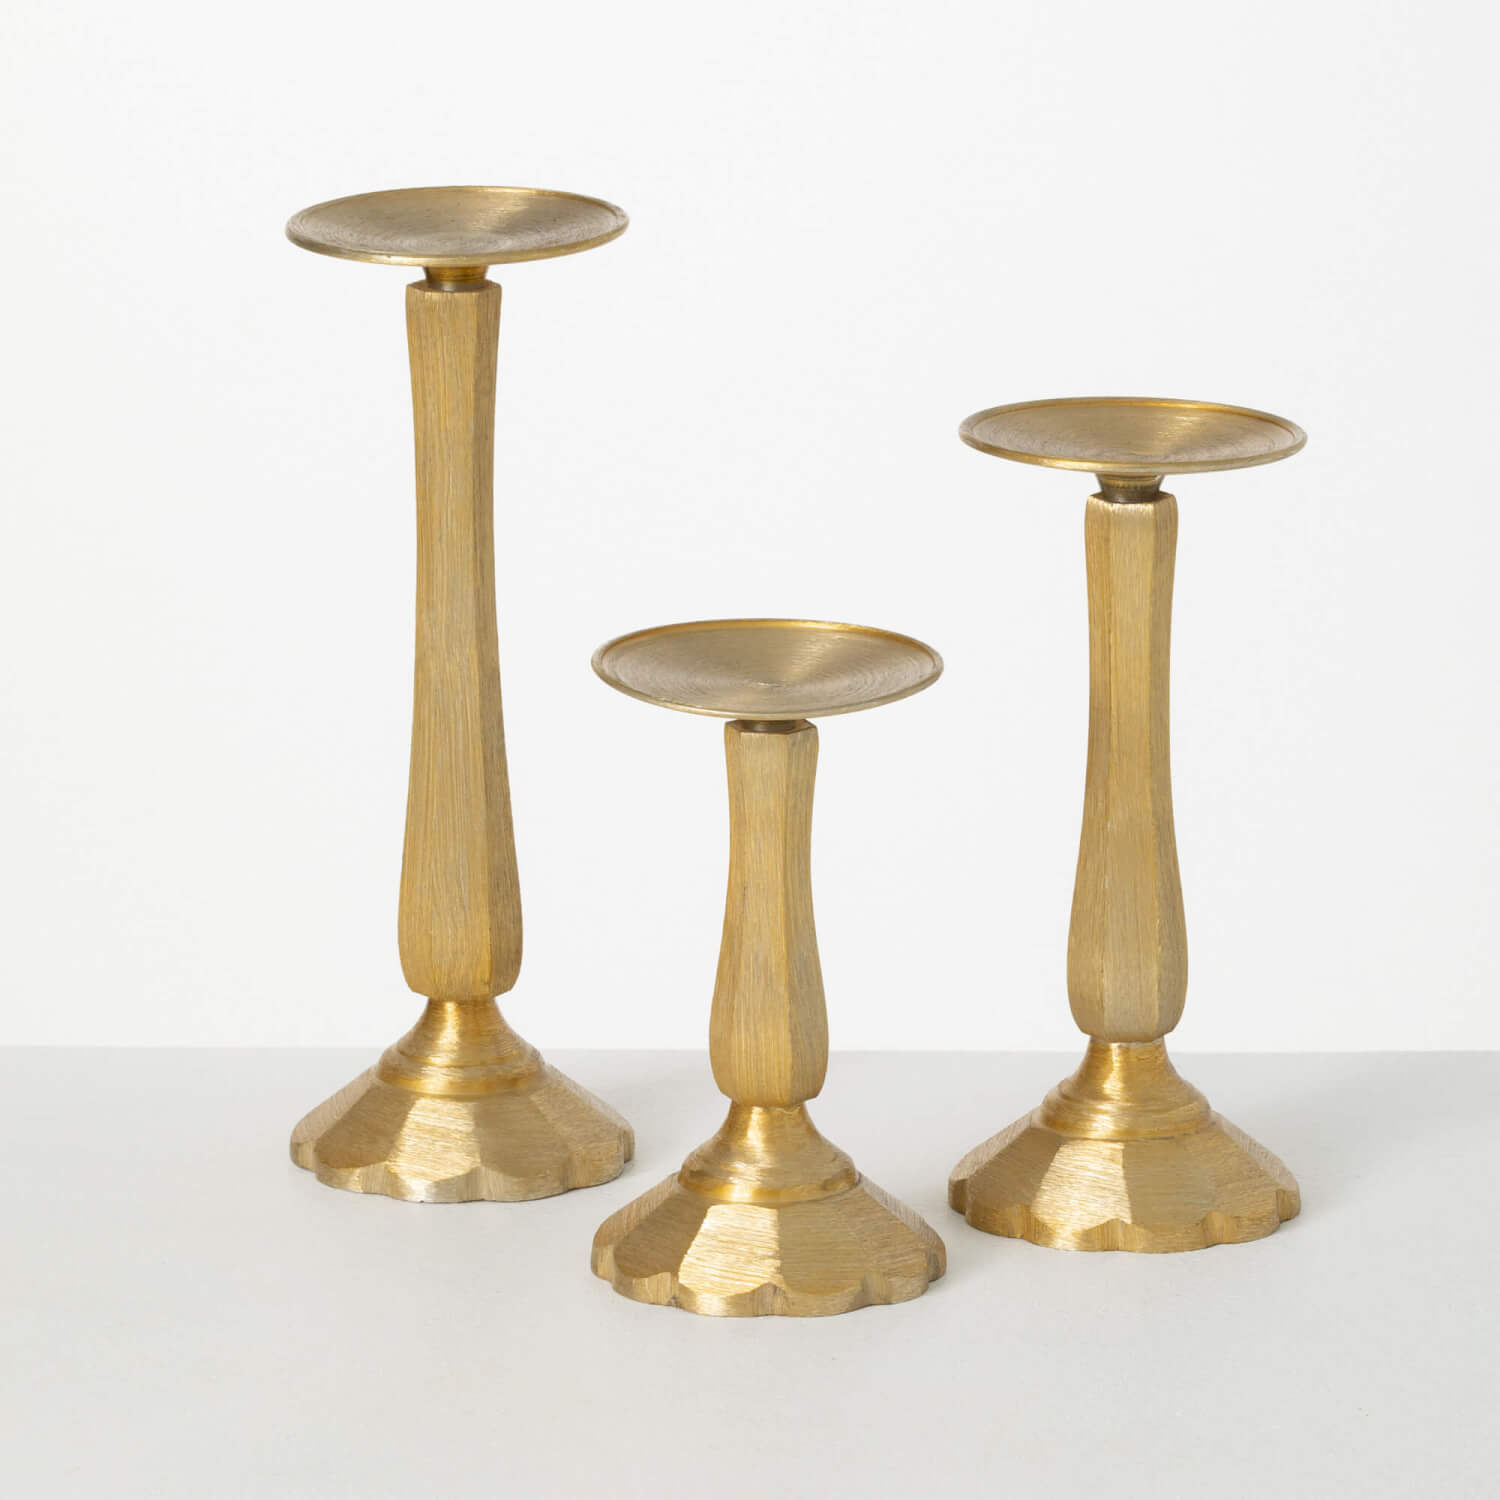 Gilded Pillar Candle Holder, Size Options